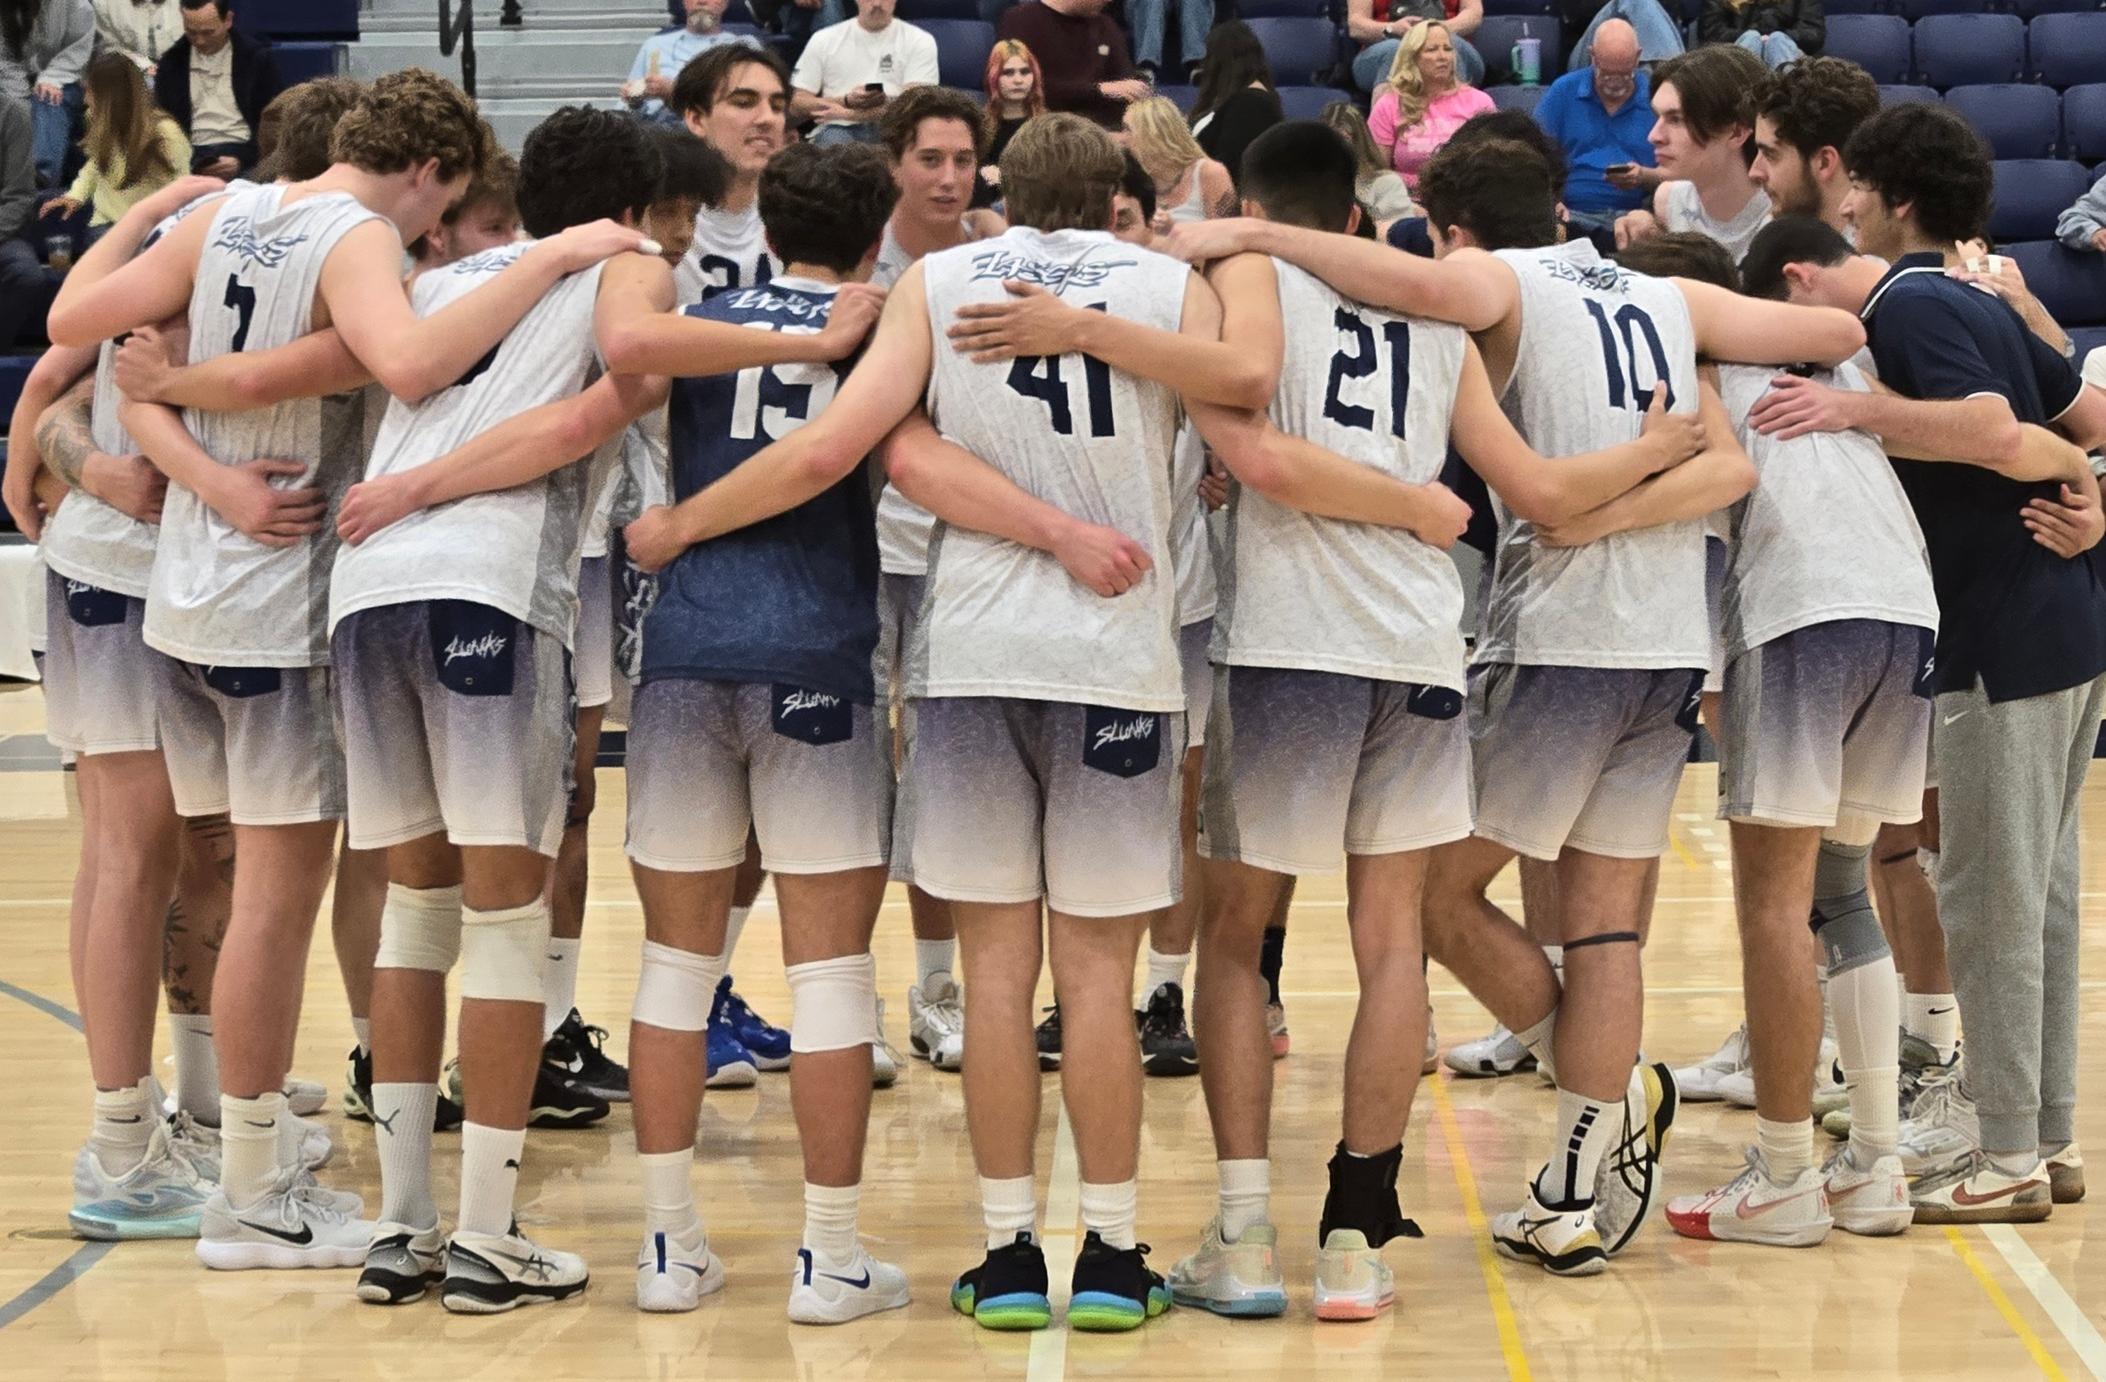 Men's volleyball team is seeded sixth in upcoming playoffs